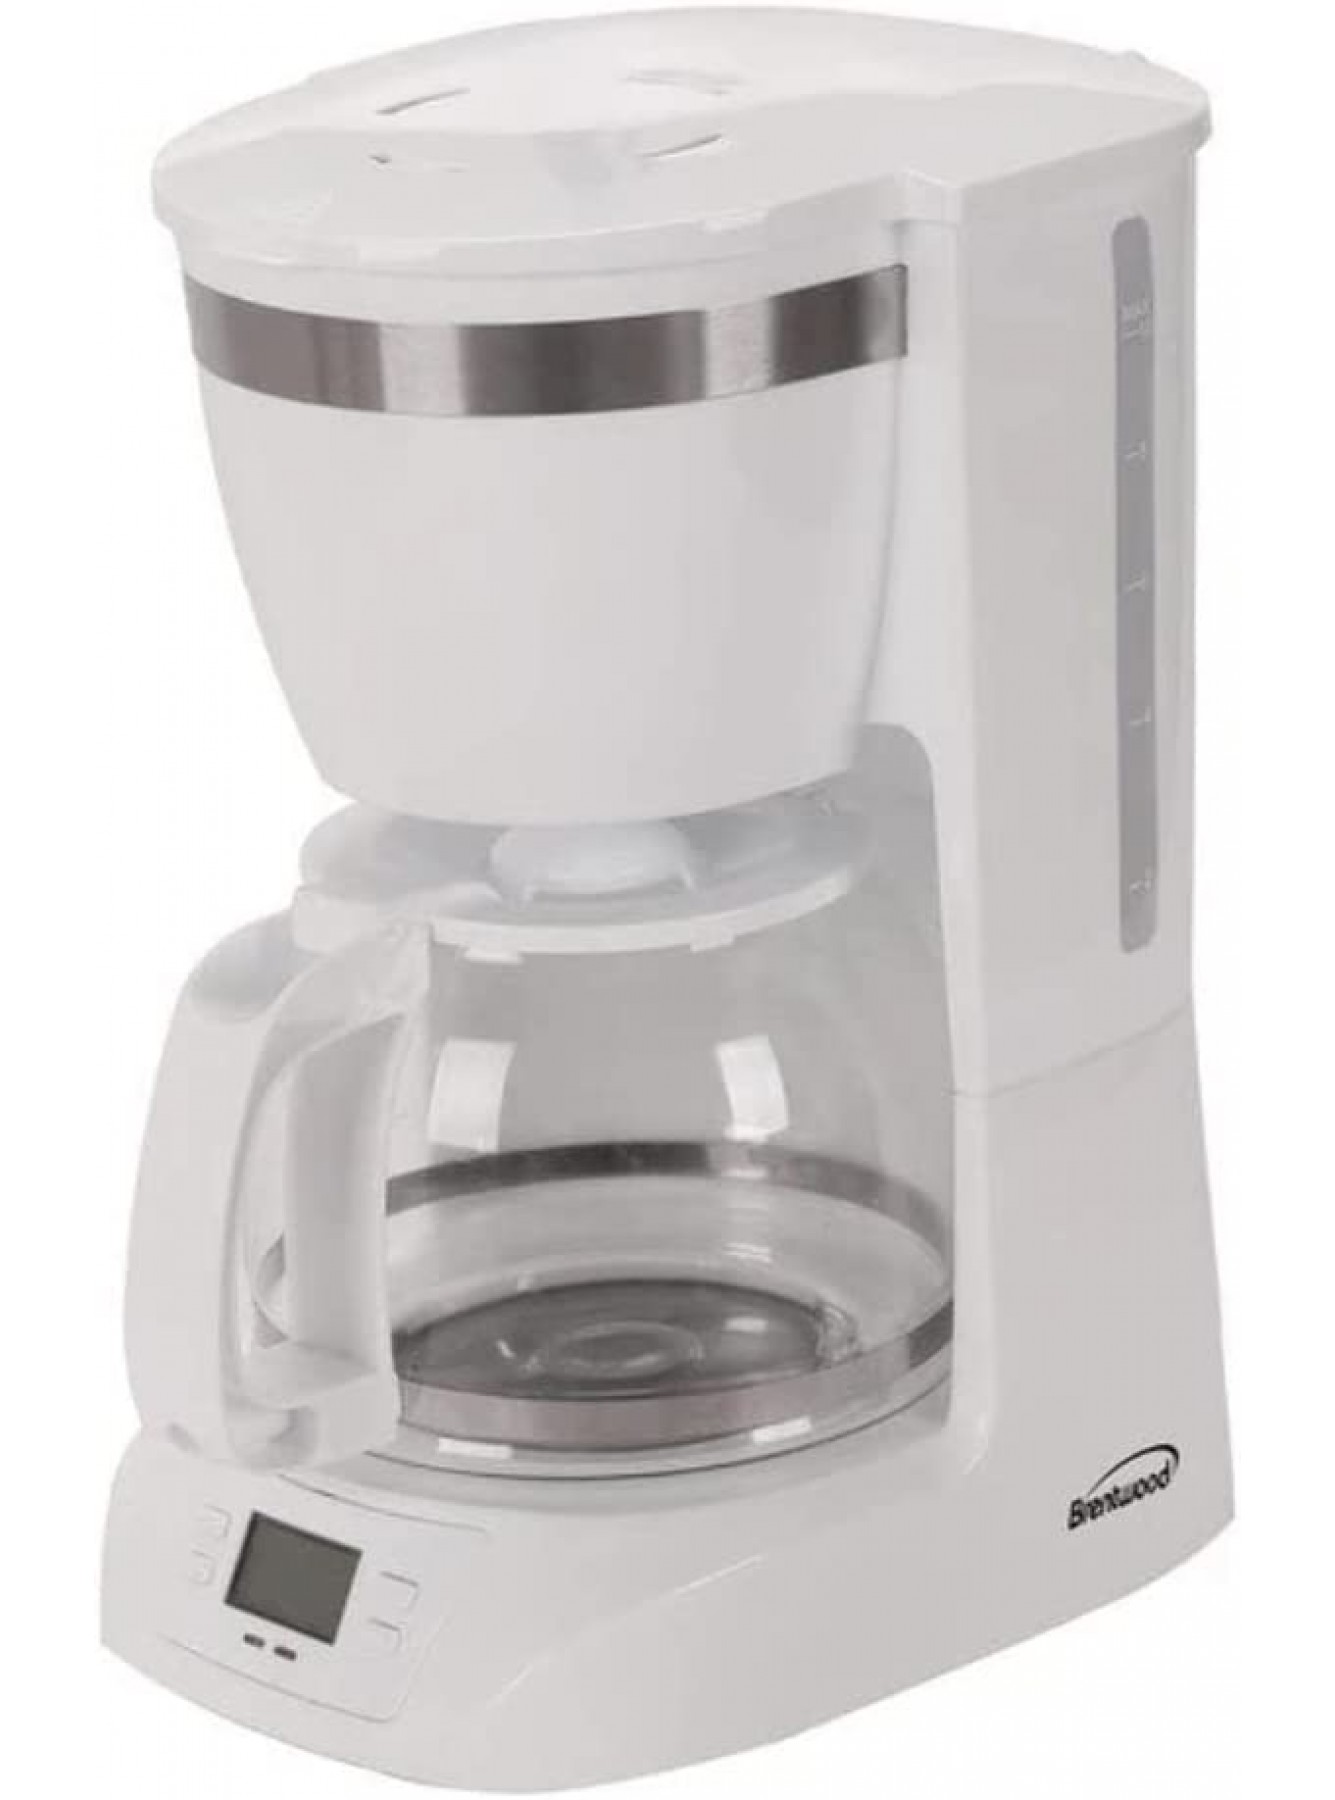 Brentwood Appliances BTWTS219W 10-Cup Digital Coffee Maker White One Size B0851LK7G7